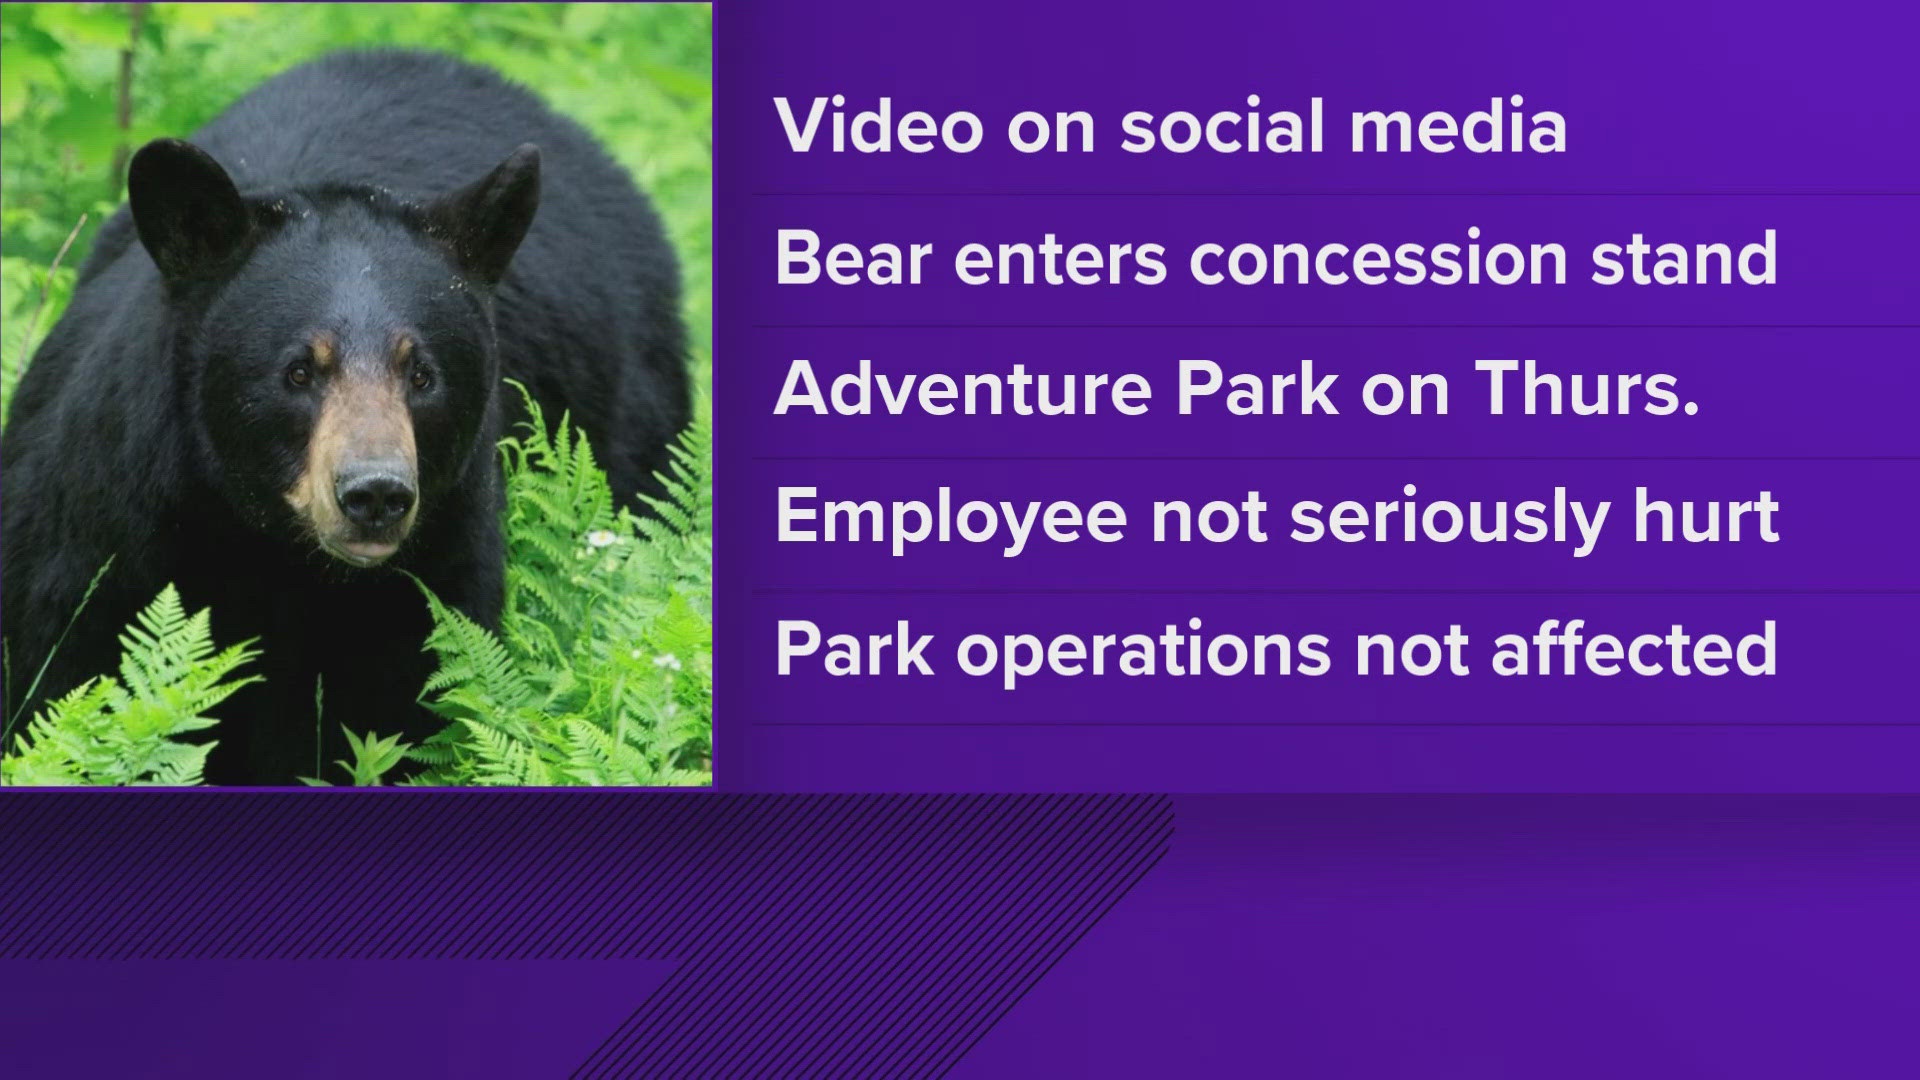 The park said the bear entered the employee entrance Thursday night when it briefly touched an employee. They also said the employee was not seriously hurt.